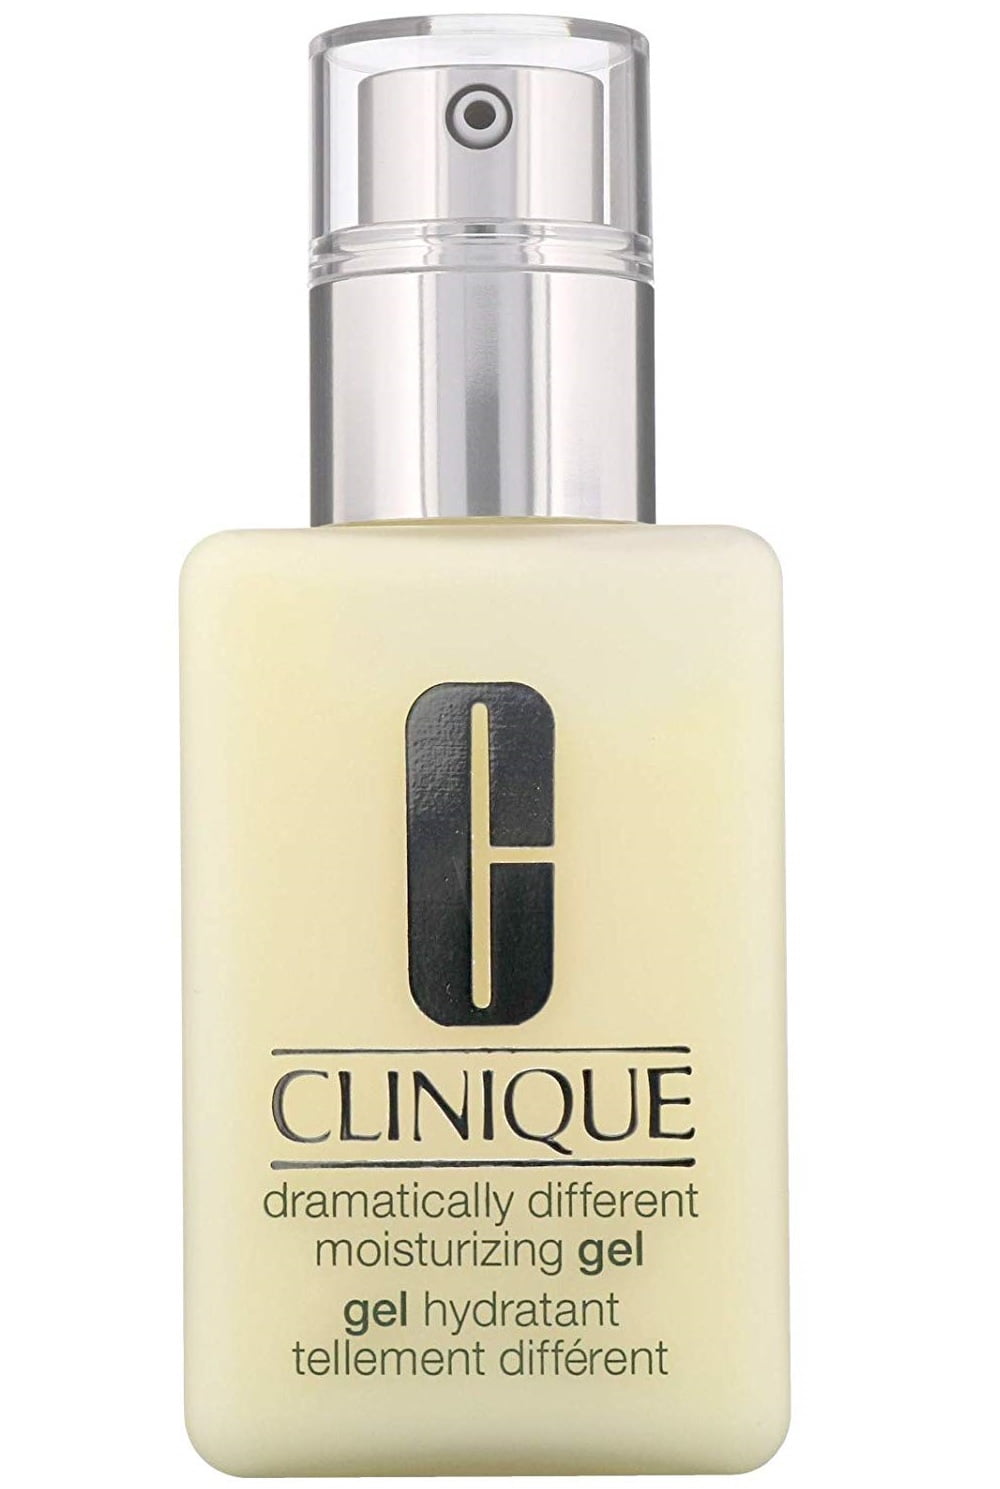 Clinique New Clinique Dramatically Different Moisturizing Gel With